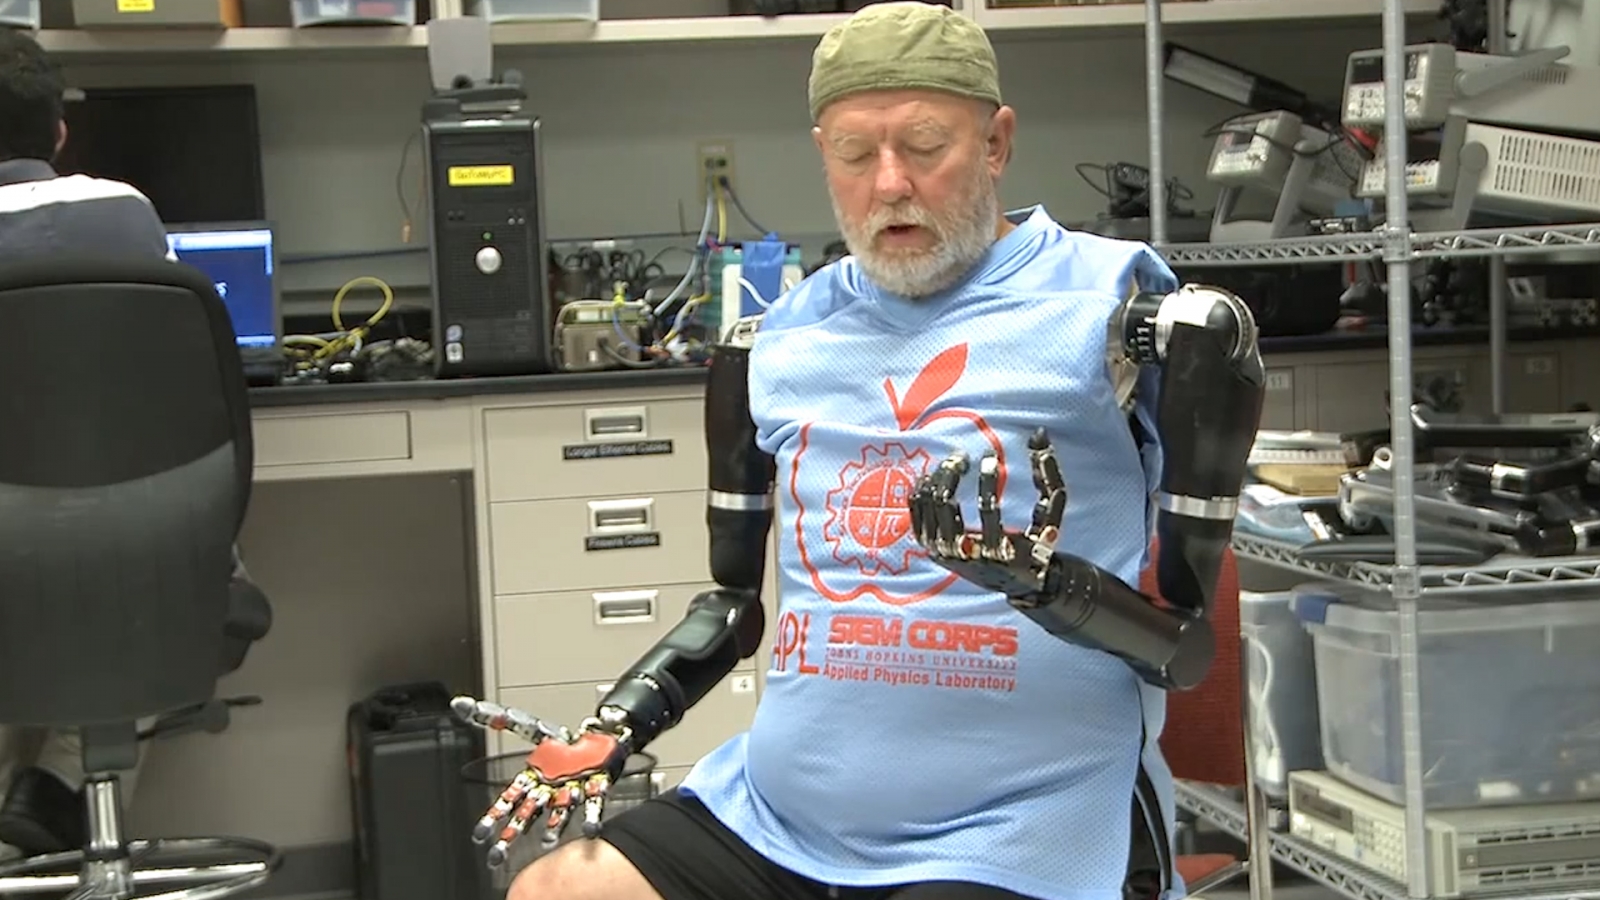 Double amputee controls two prosthetic arms with just his mind